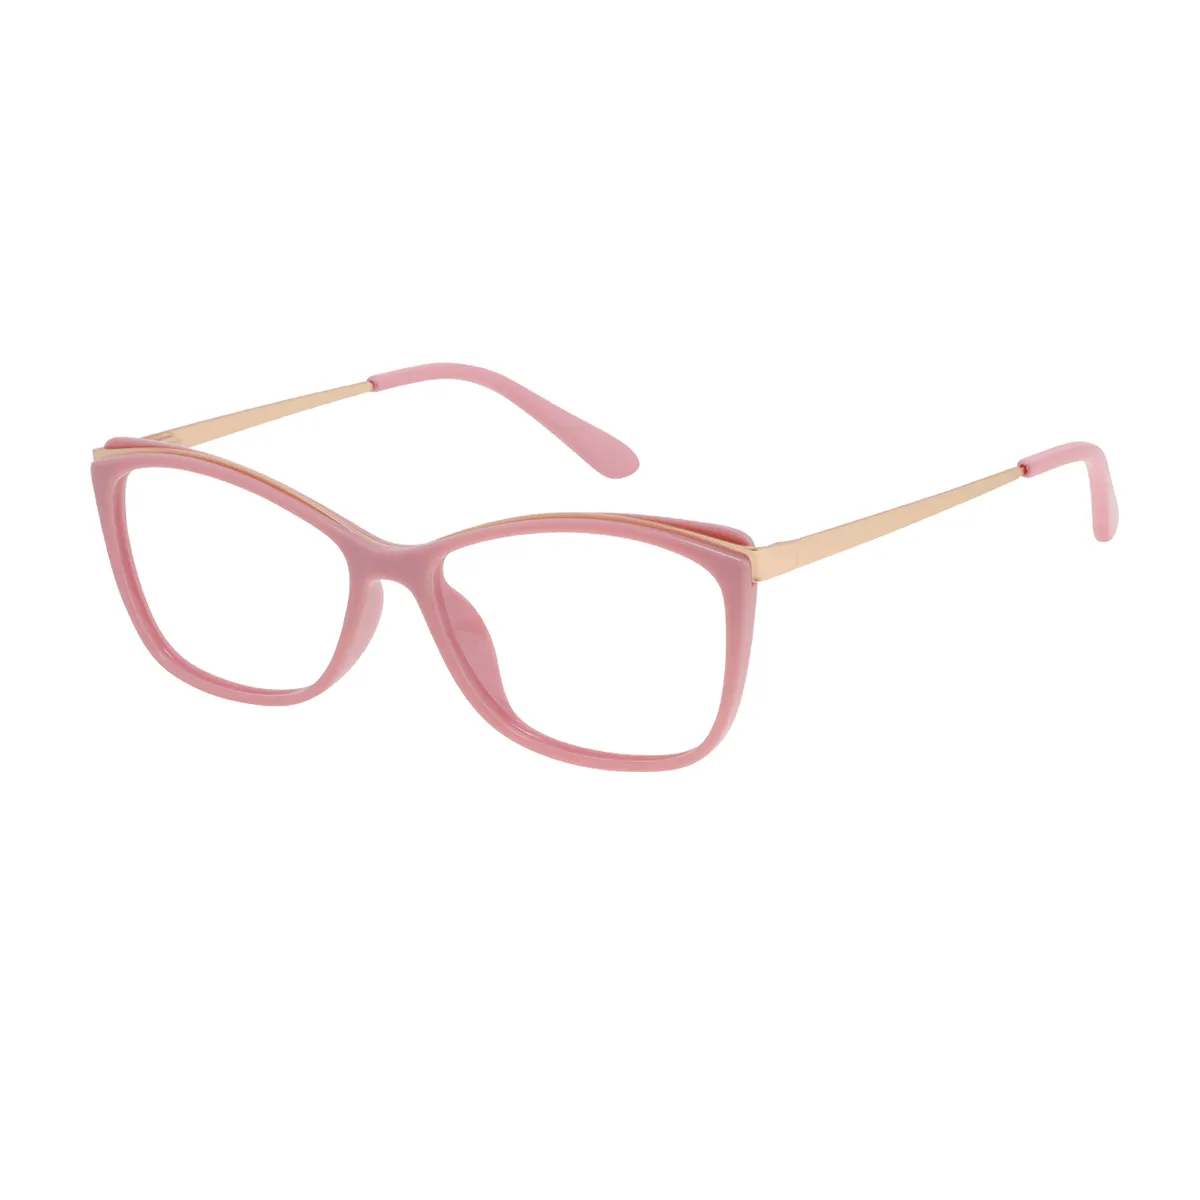 Fashion Rectangle Pink-gold Reading Glasses for Women